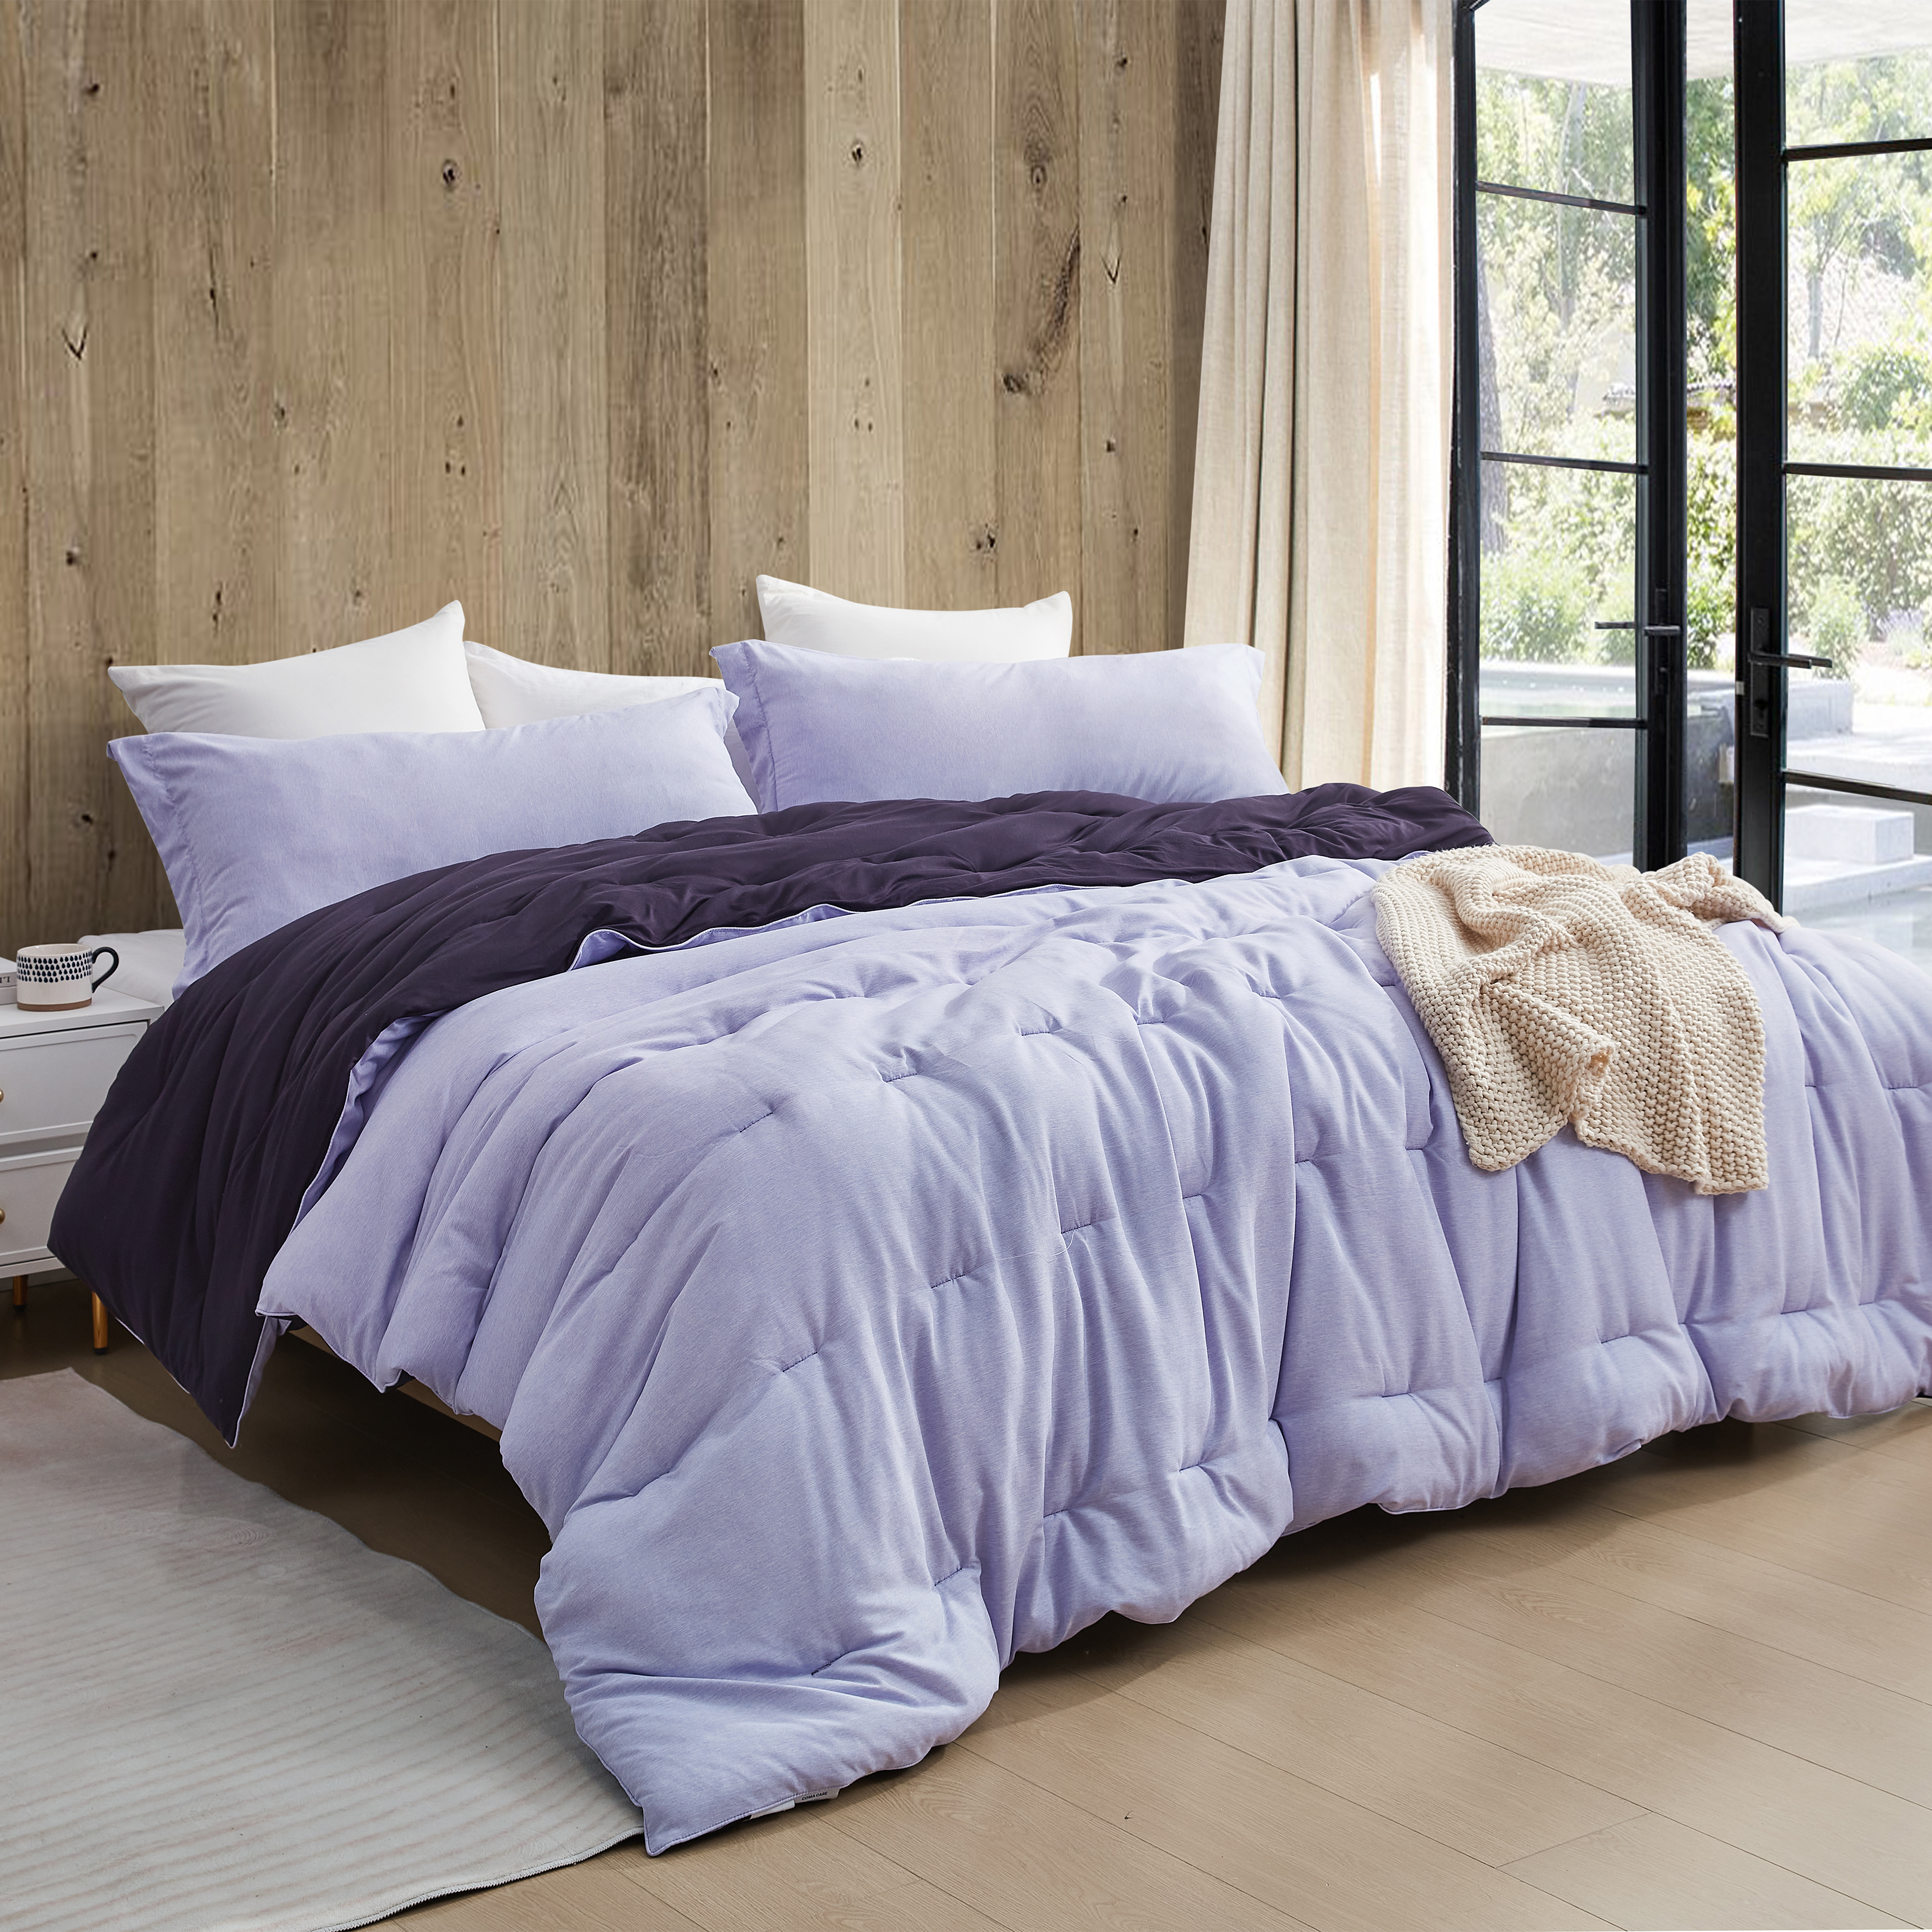 Yoga Pants - Coma Inducer Oversized Cooling Comforter - Sweet Lavender x Midnight Purple